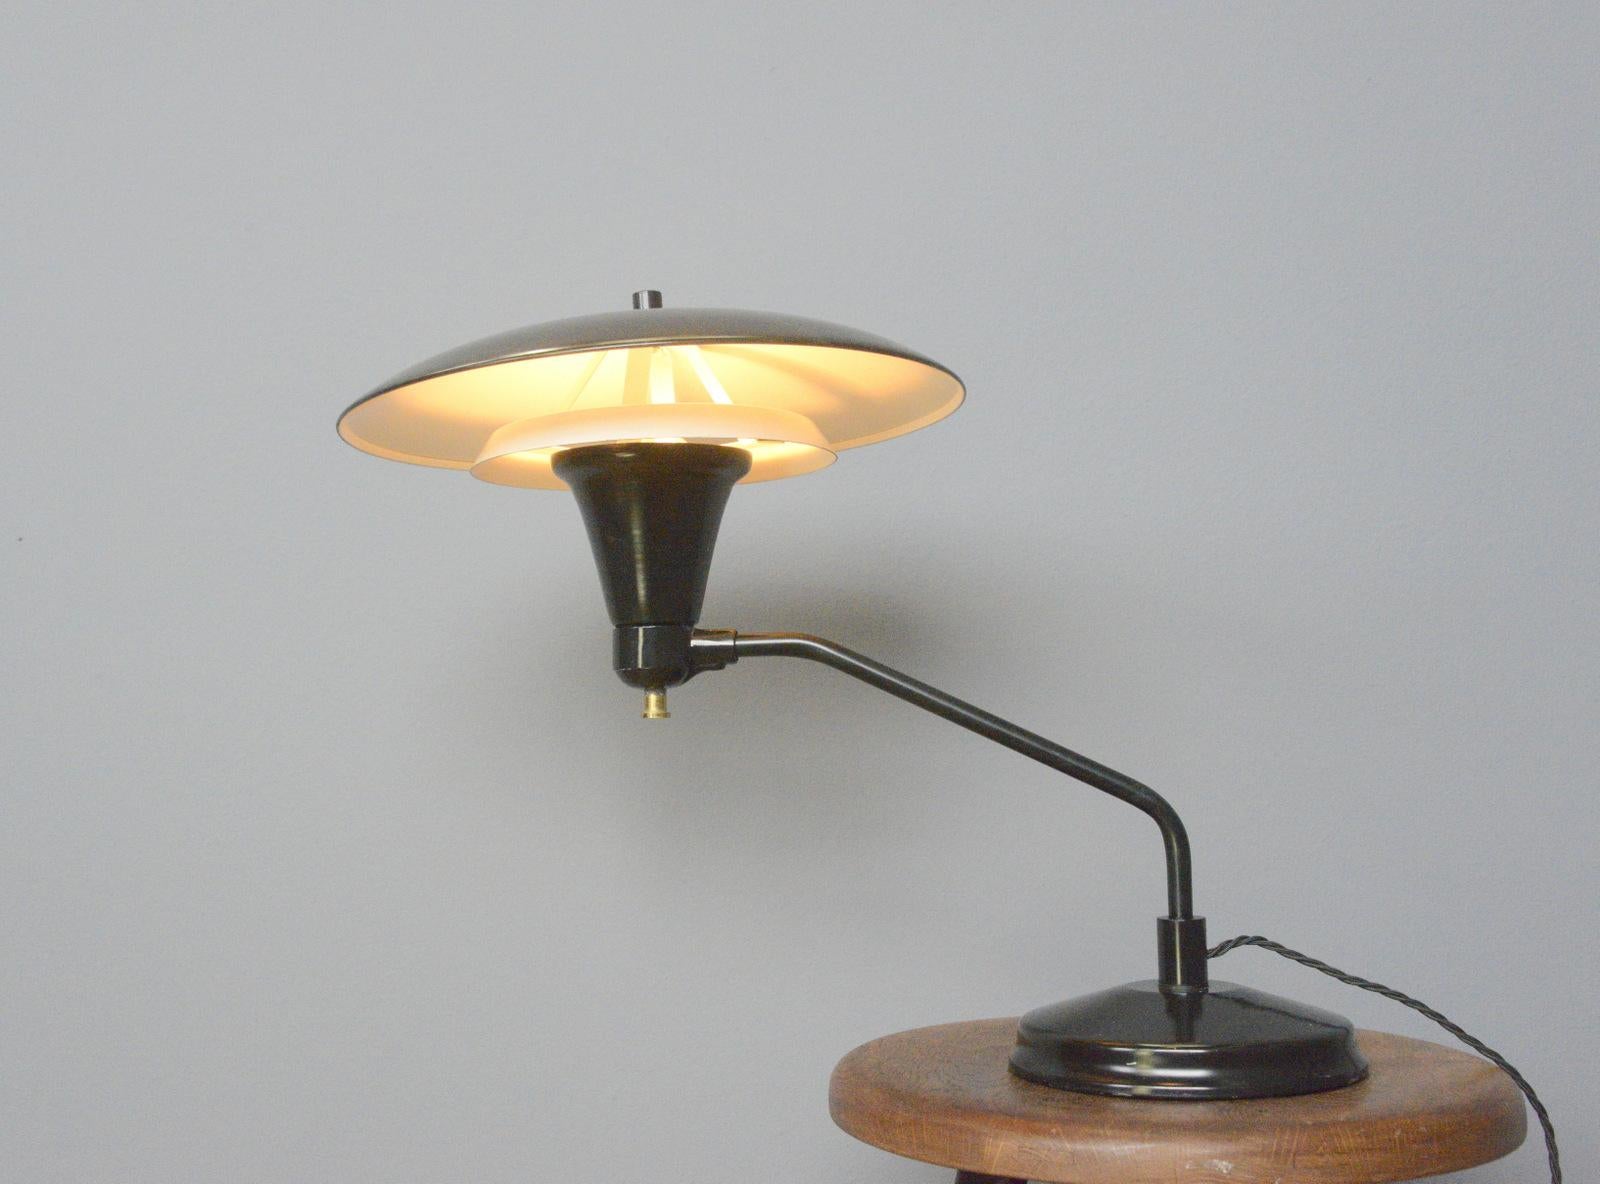 Mid-century lamp by Art Specialty Company Circa 1950s

- Steel shade and arm
- Heavy cast iron base
- Takes E27 fitting bulbs
- On/Off switch on the cable
- Made by Art Specialty Company, Chicago
- American ~ 1950s 
- Measures: 42cm tall x